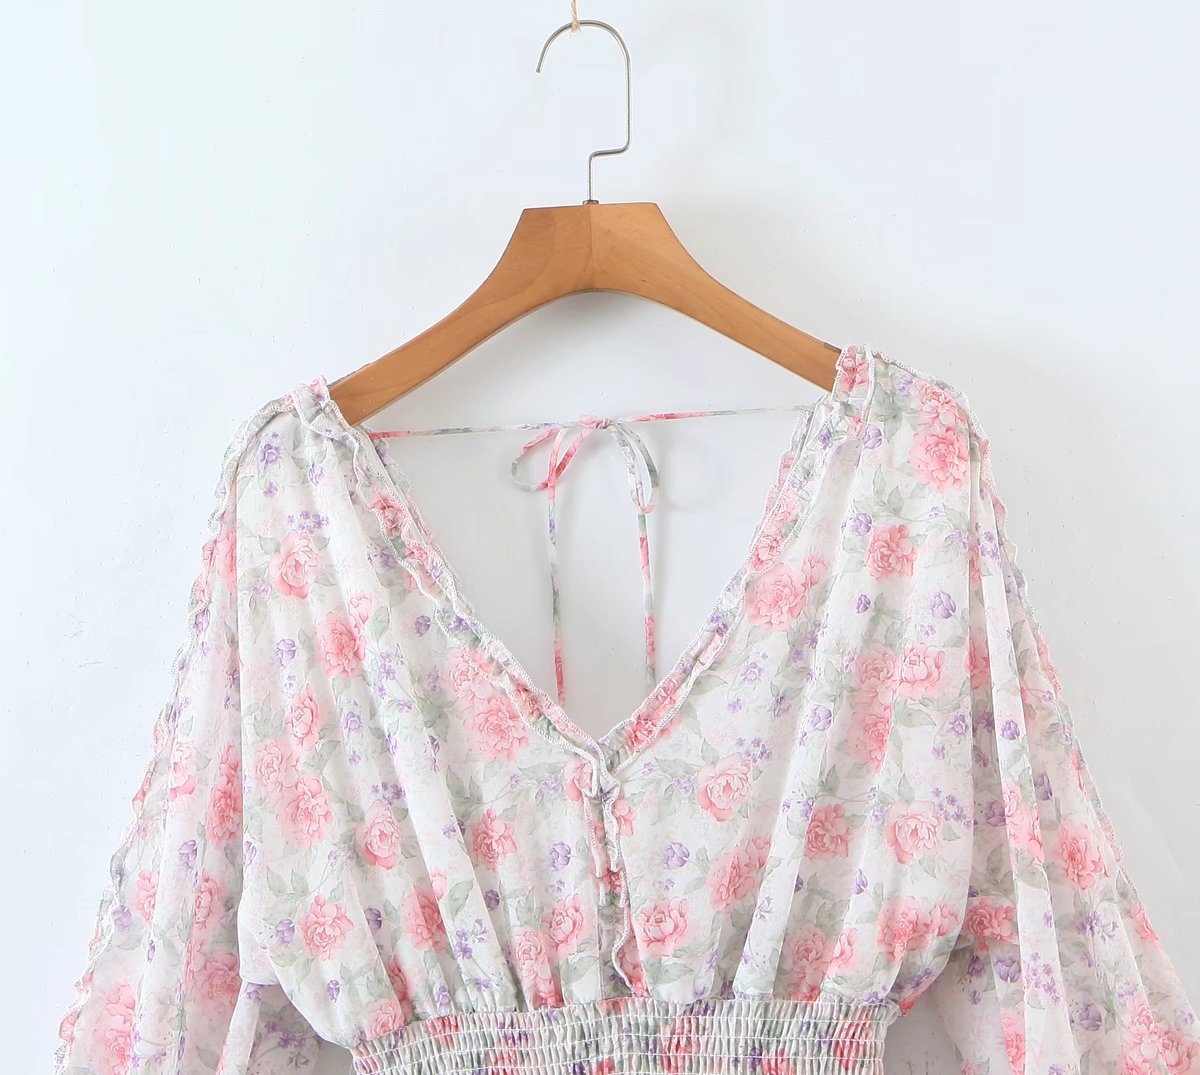 Dreamy Floral 1970s Style Pastel Short Ruffled Dress